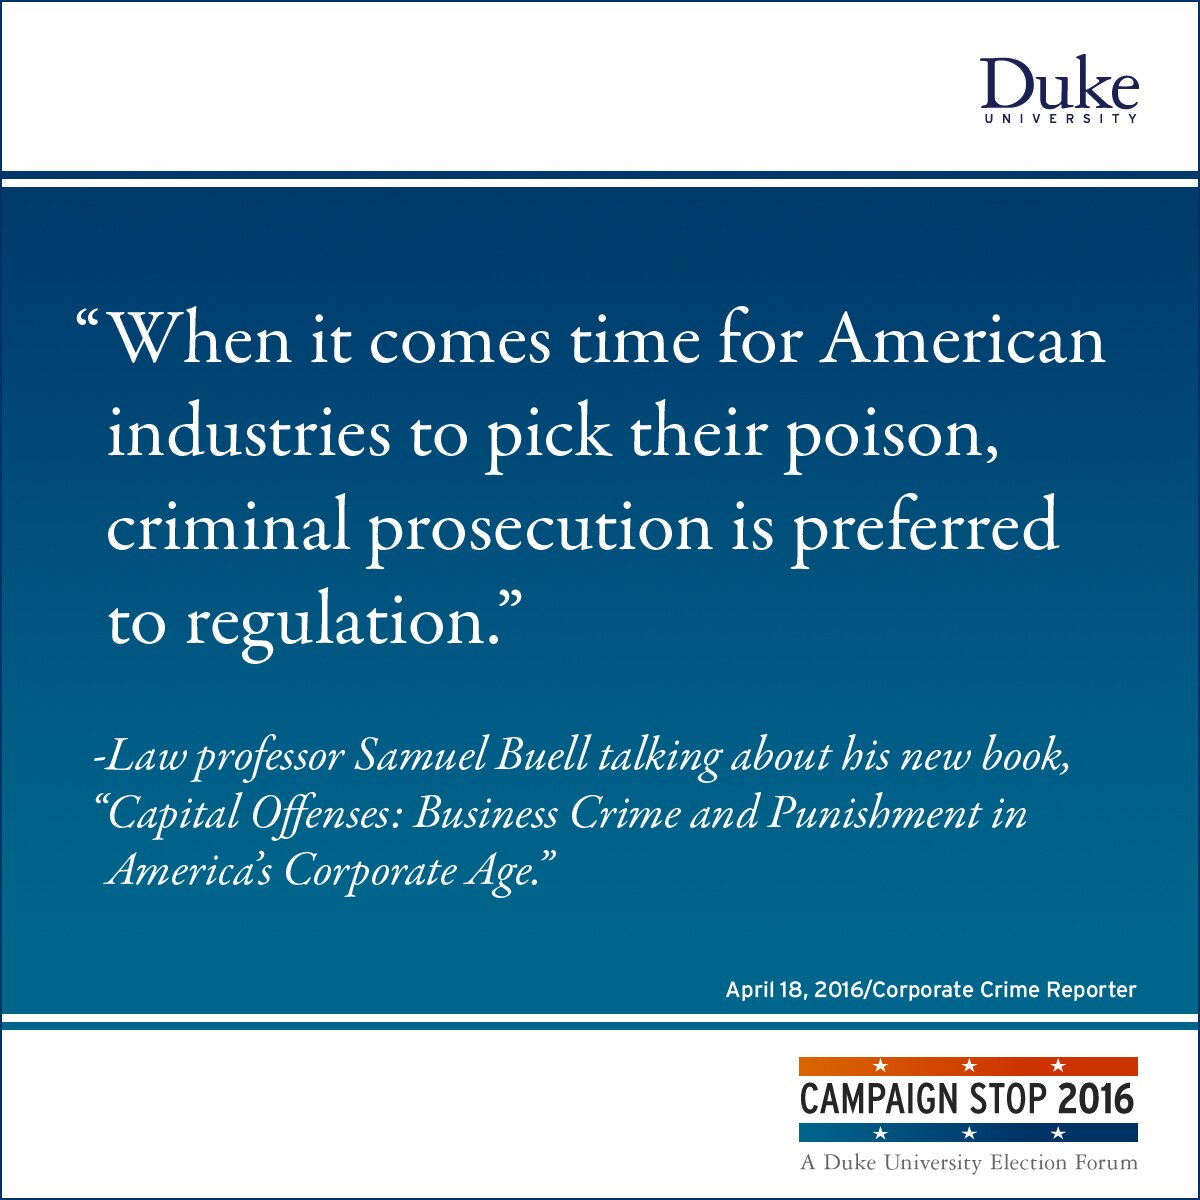 “When it comes time for American industries to pick their poison, criminal prosecution is preferred to regulation.” -Law professor Samuel Buell talking about his new book, “Capital Offenses: Business Crime and Punishment in America’s Corporate Age.”